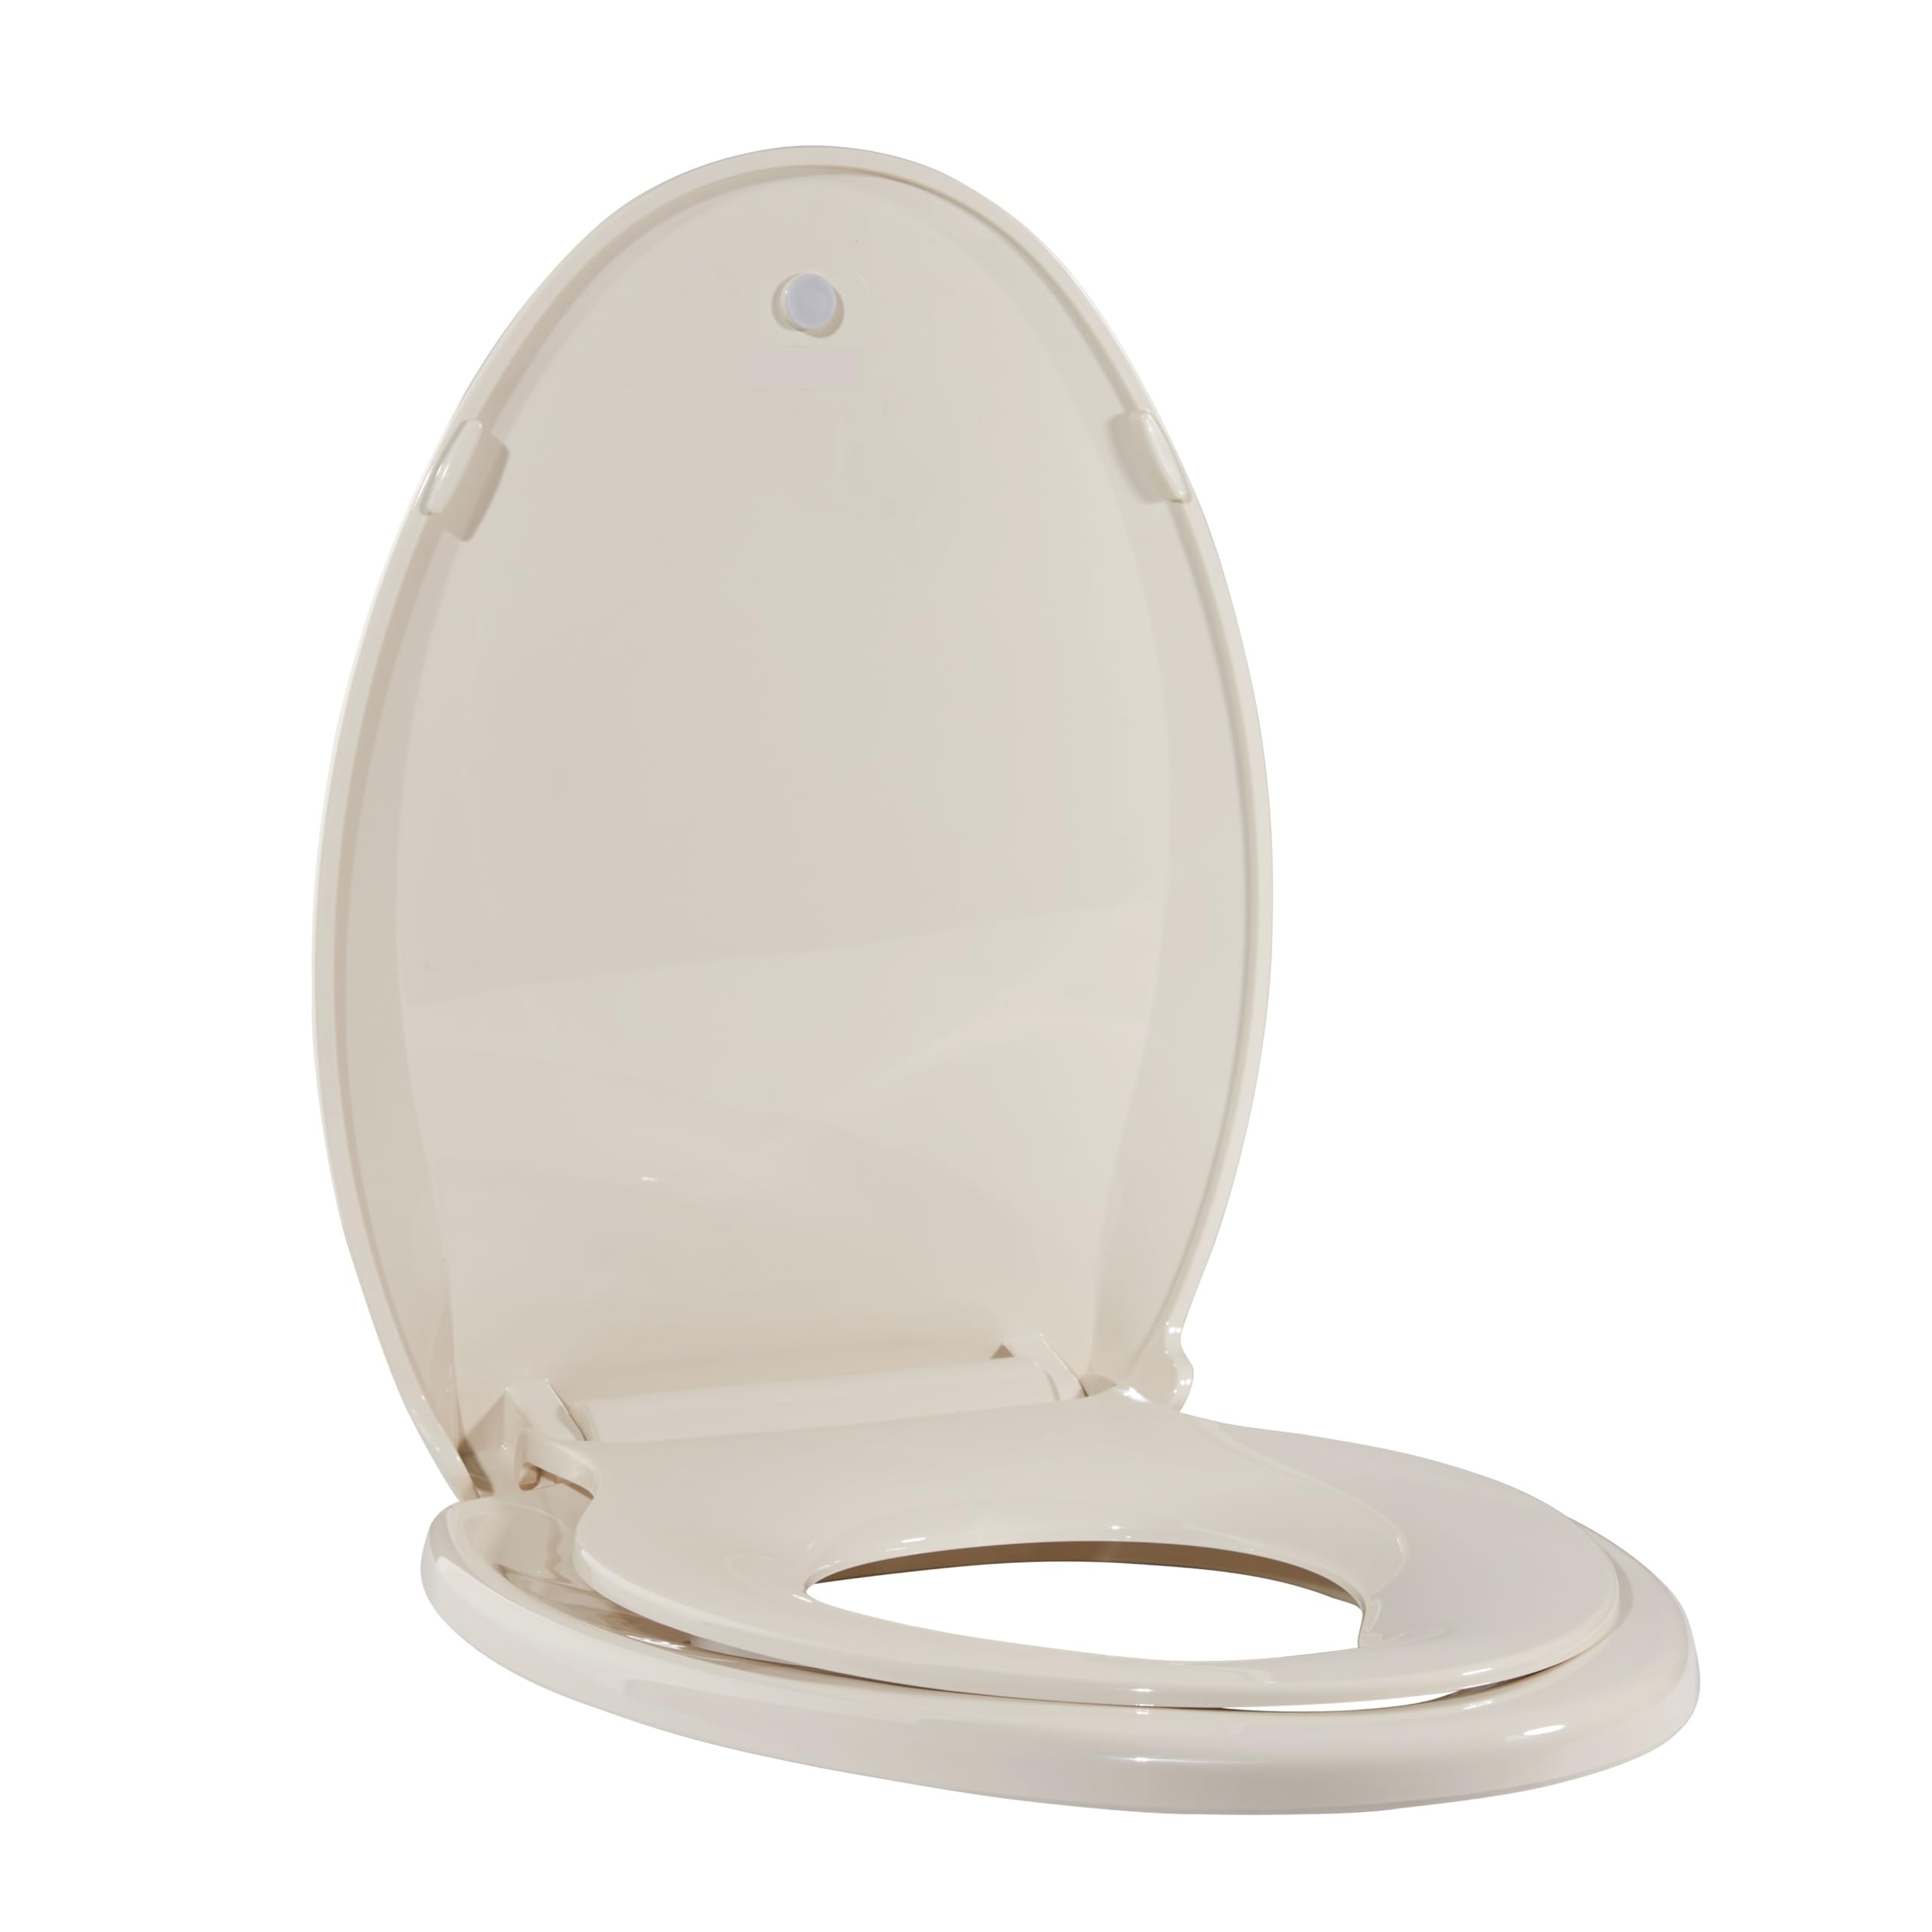 Toilet Seat, Elongated Toilet Seat with Toddler Seat Built in, Potty Training Toilet Seat Elongated Fits Both Adult and Child, with Slow Close and Magnets- Elongated Almond